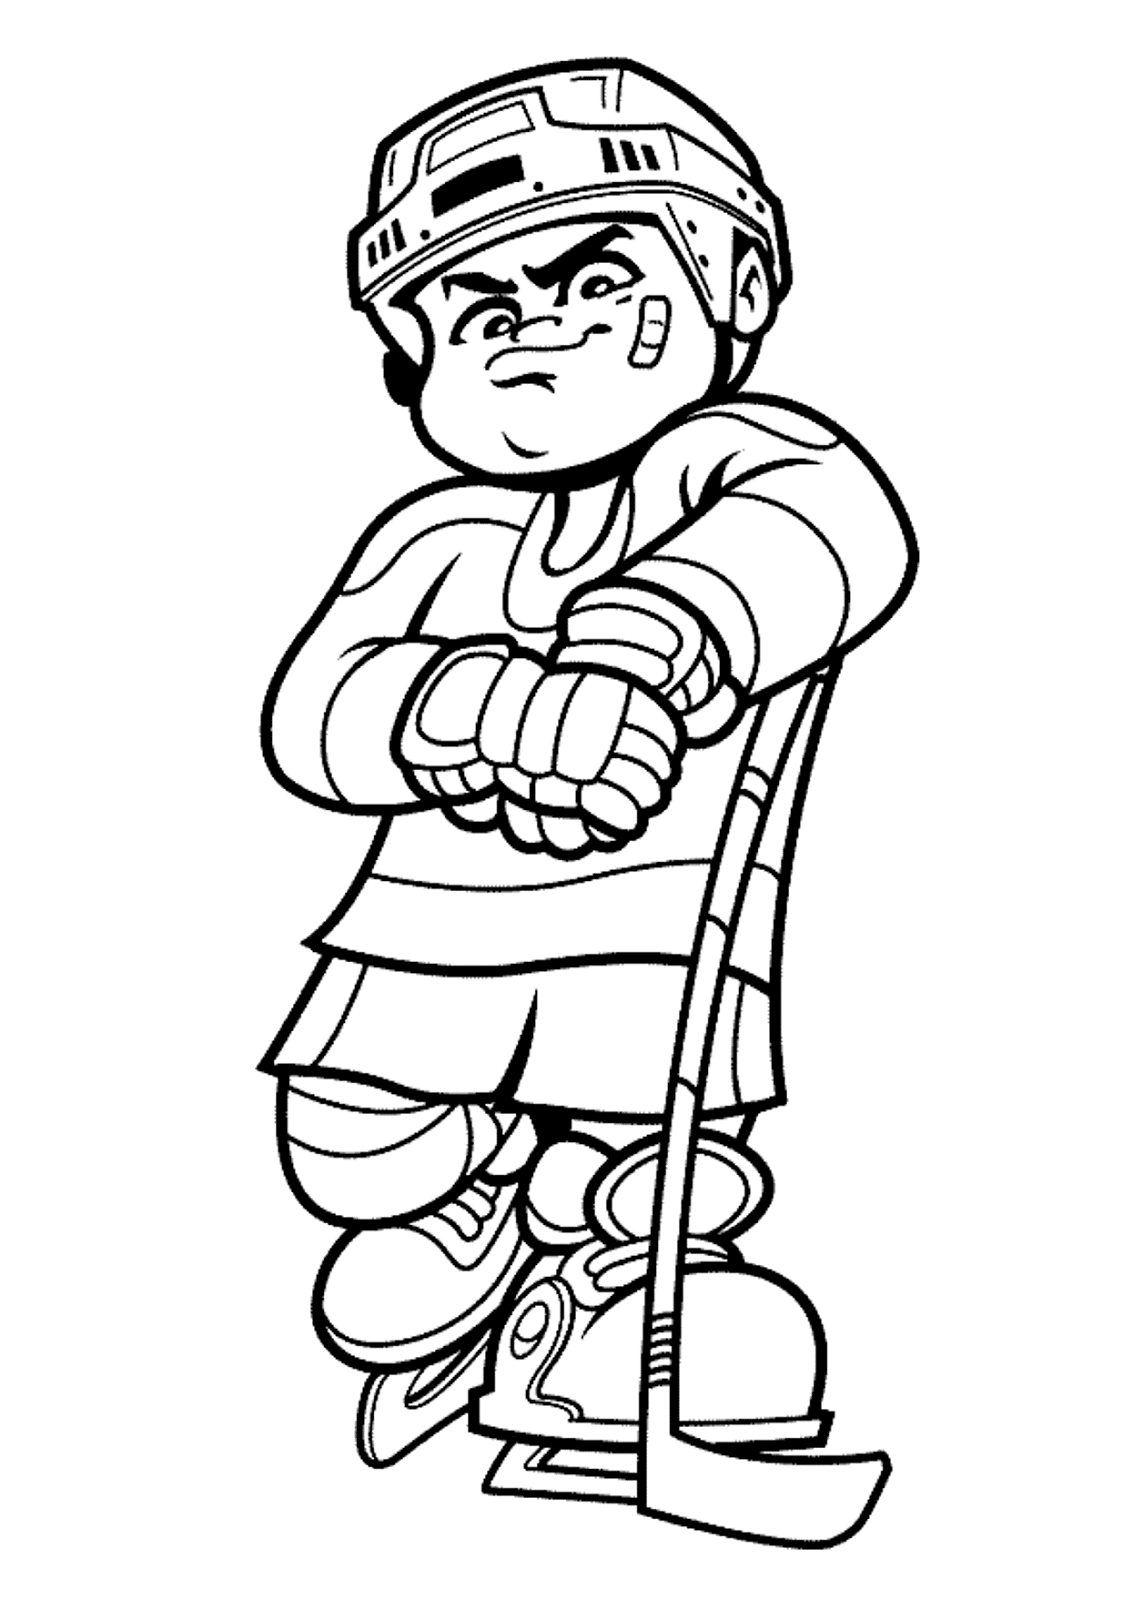 types-of-sports-coloring-pages-for-kids-hockey-sports-coloring-pages